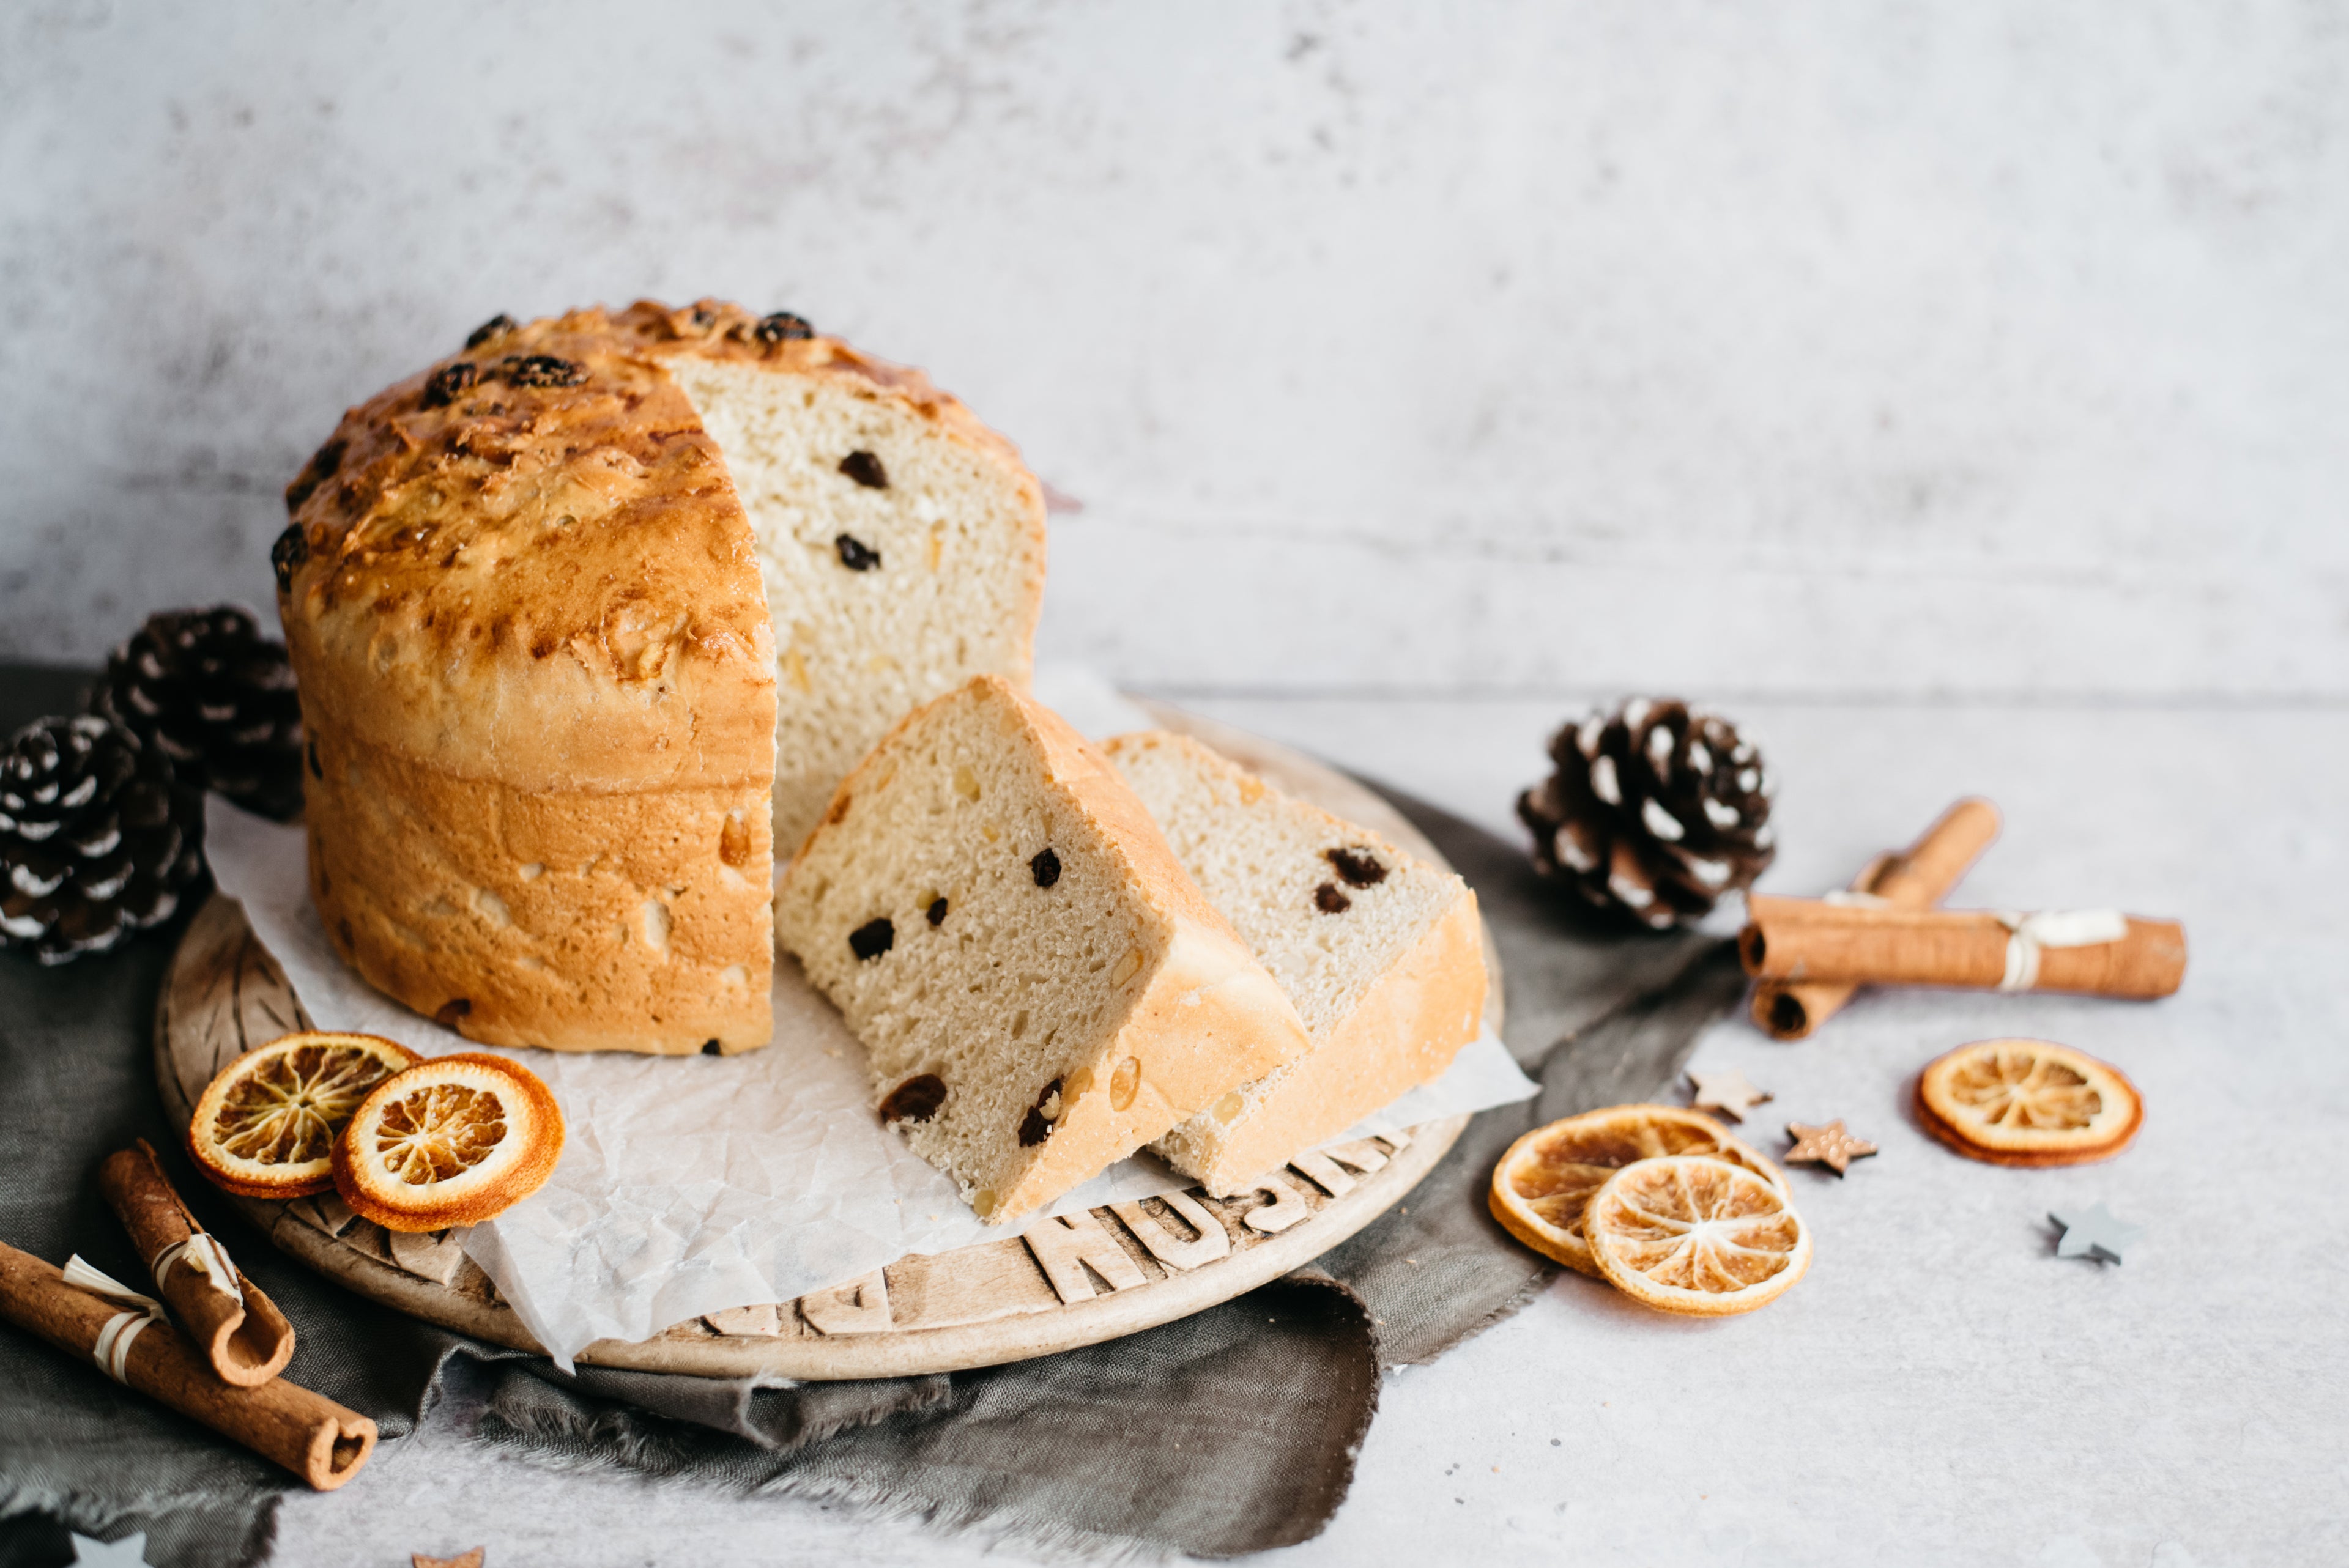 Panettone served on a wooden serving board, with a slice cut out showing the fluffy, fruit filled insides.